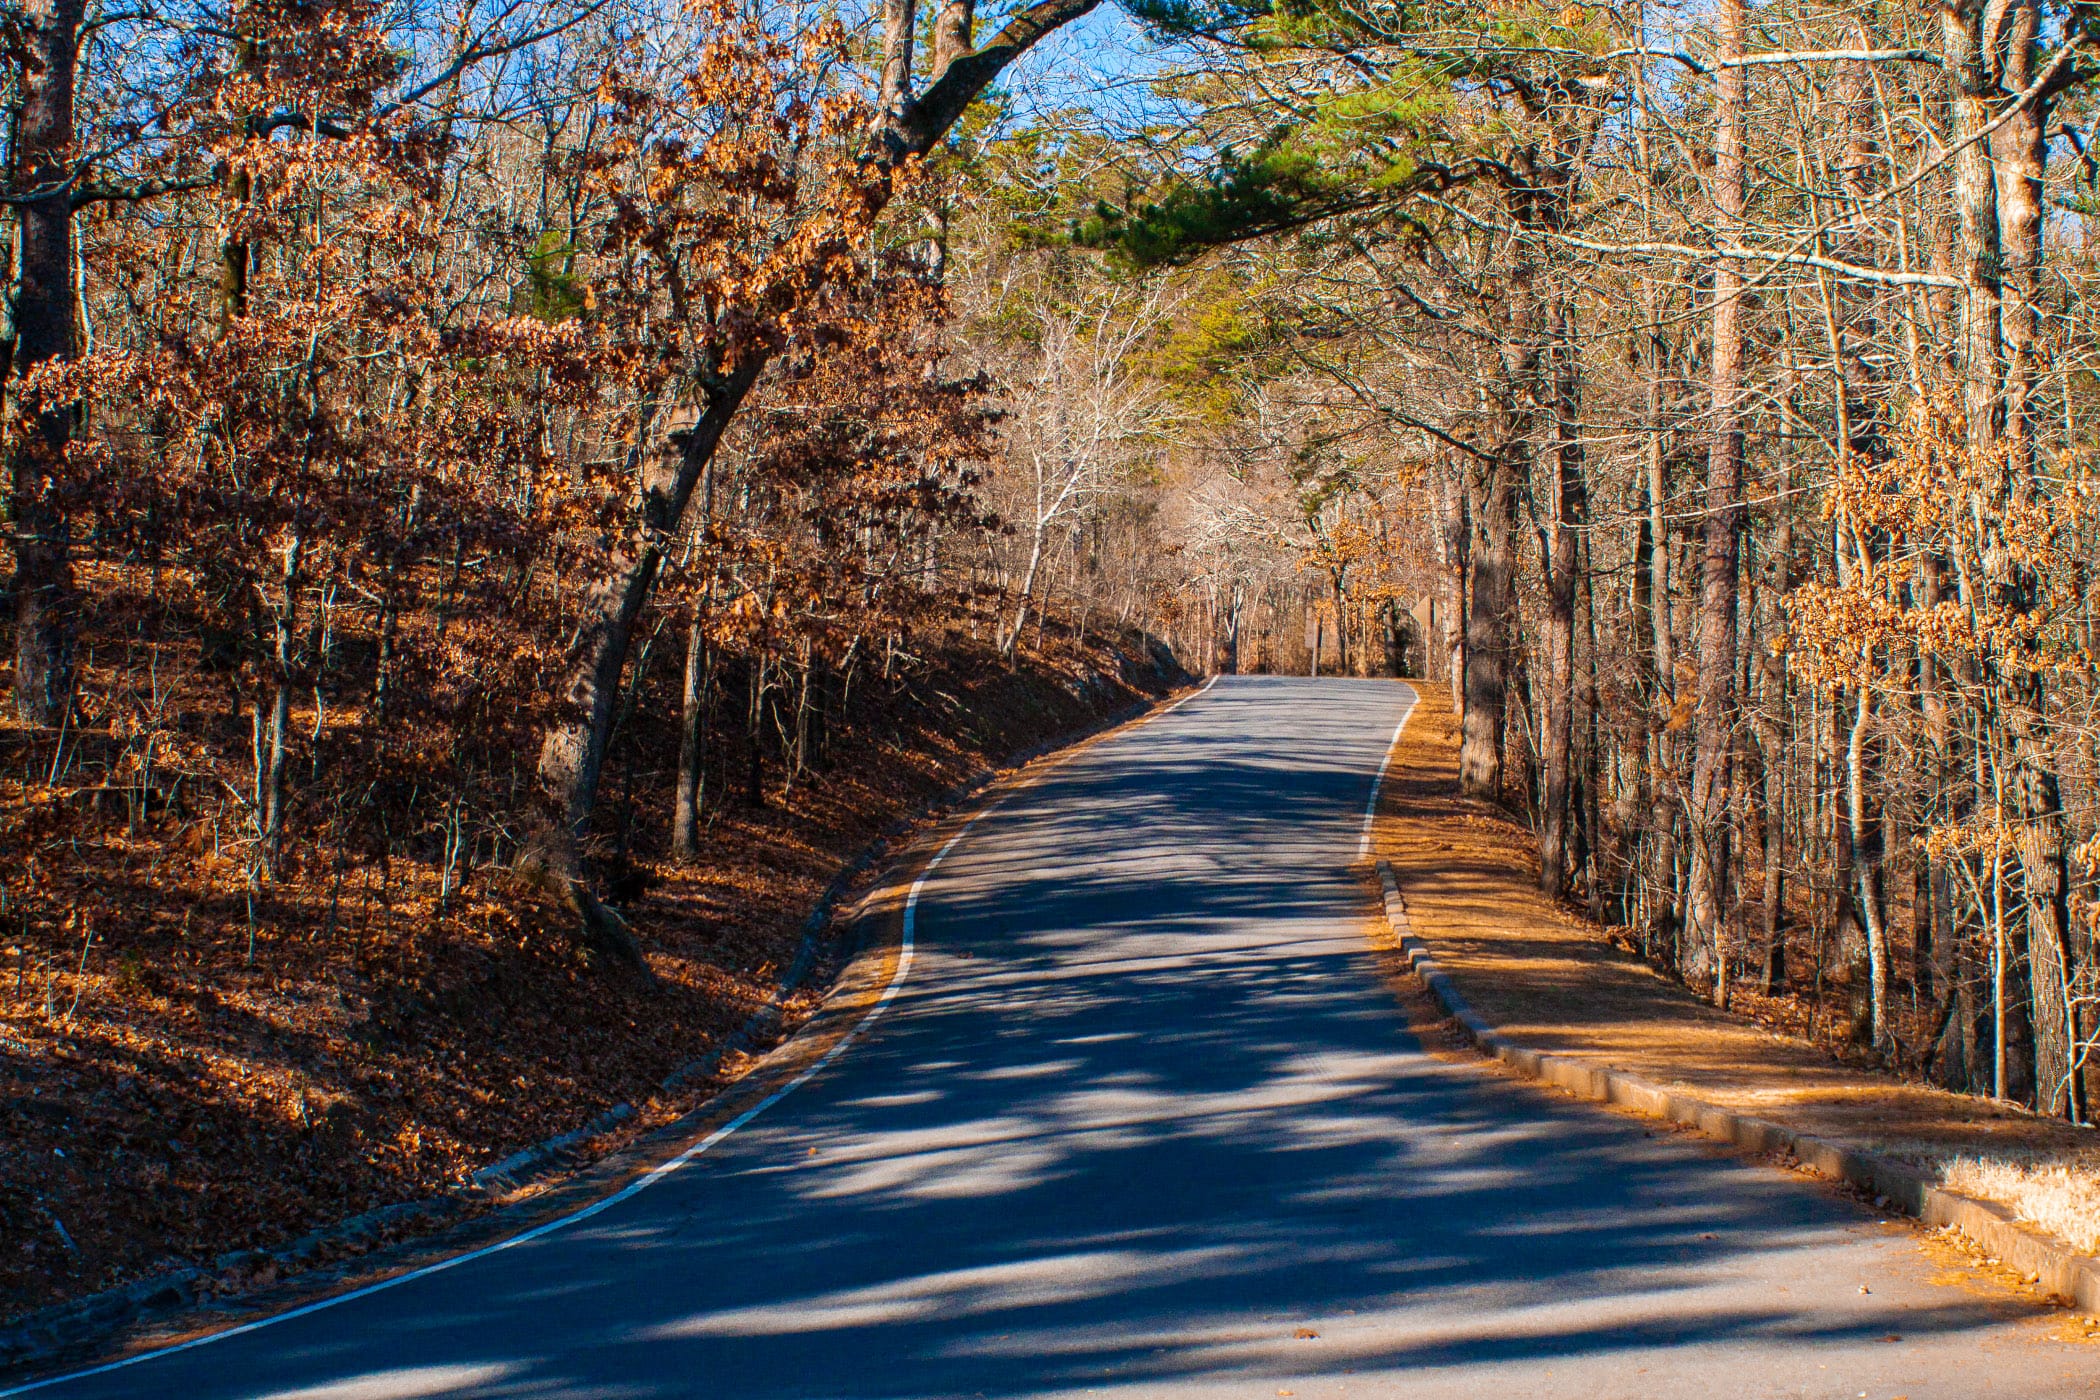 A road winds through the trees atop a hill near Hot Springs, Arkansas.